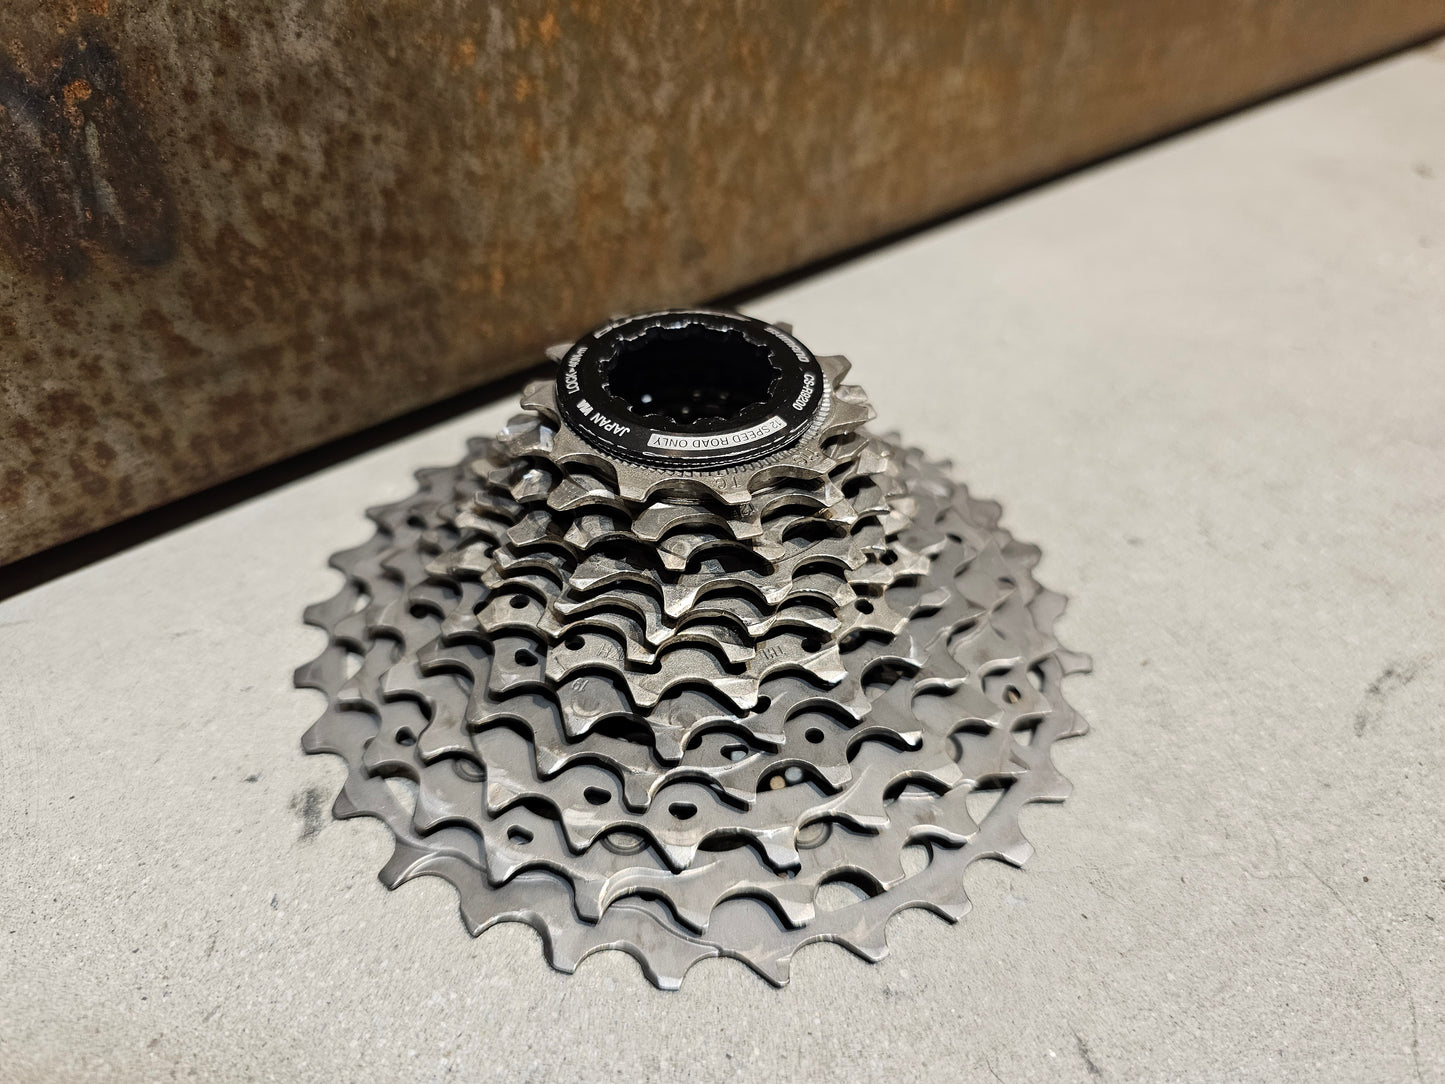 SHIMANO DURA ACE CASSETTE CS-R9200 12 TIMES USED